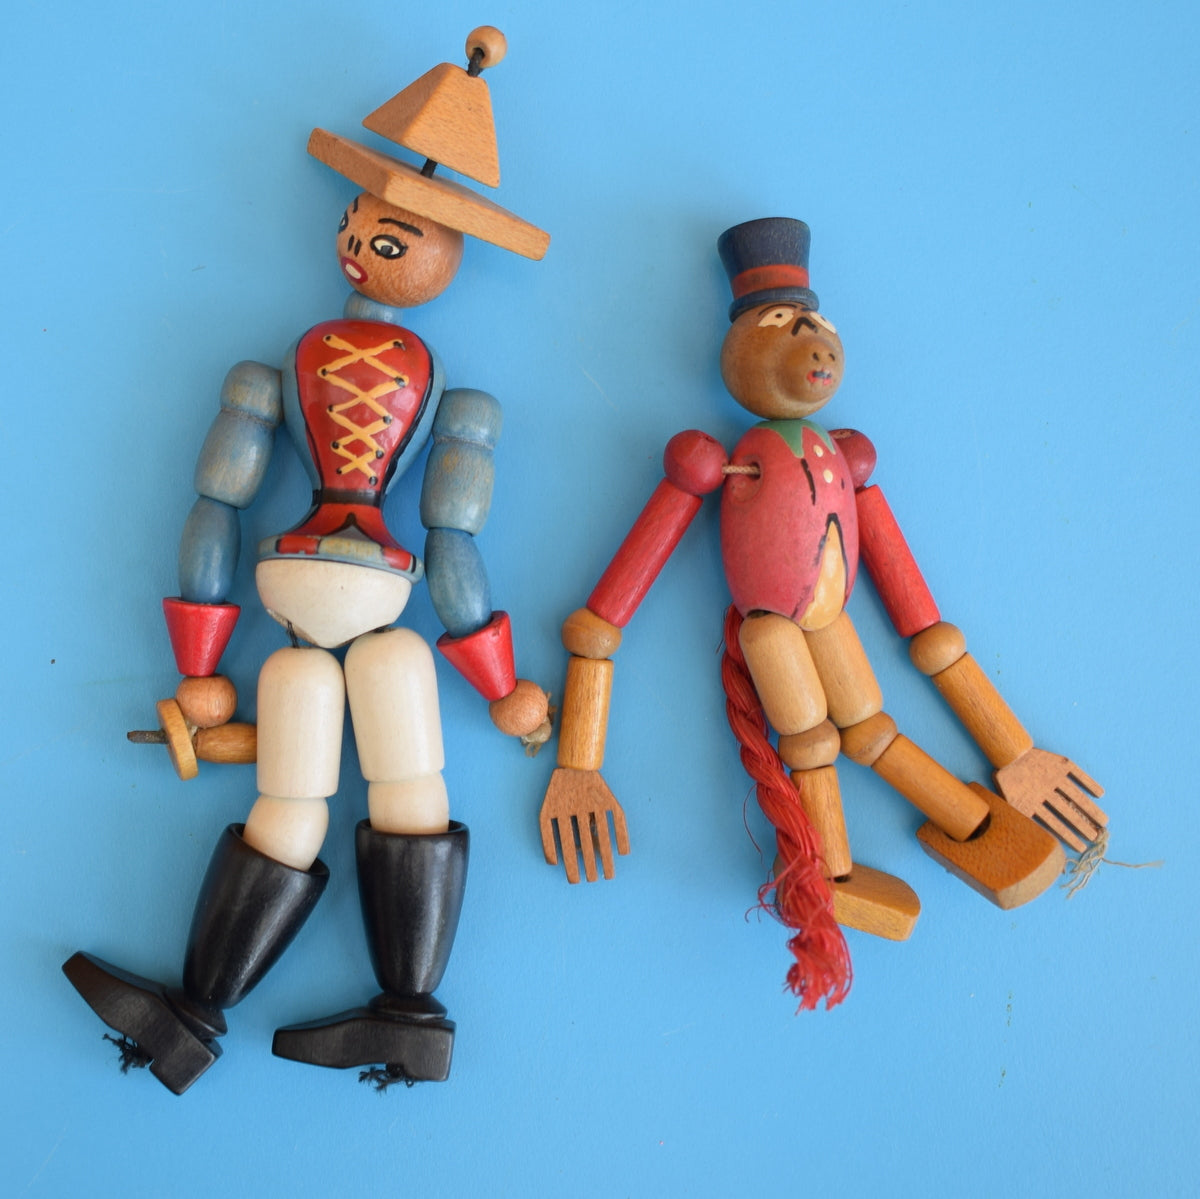 Vintage 1950s Wooden Jointed Decorations - Soldier/ Monkey